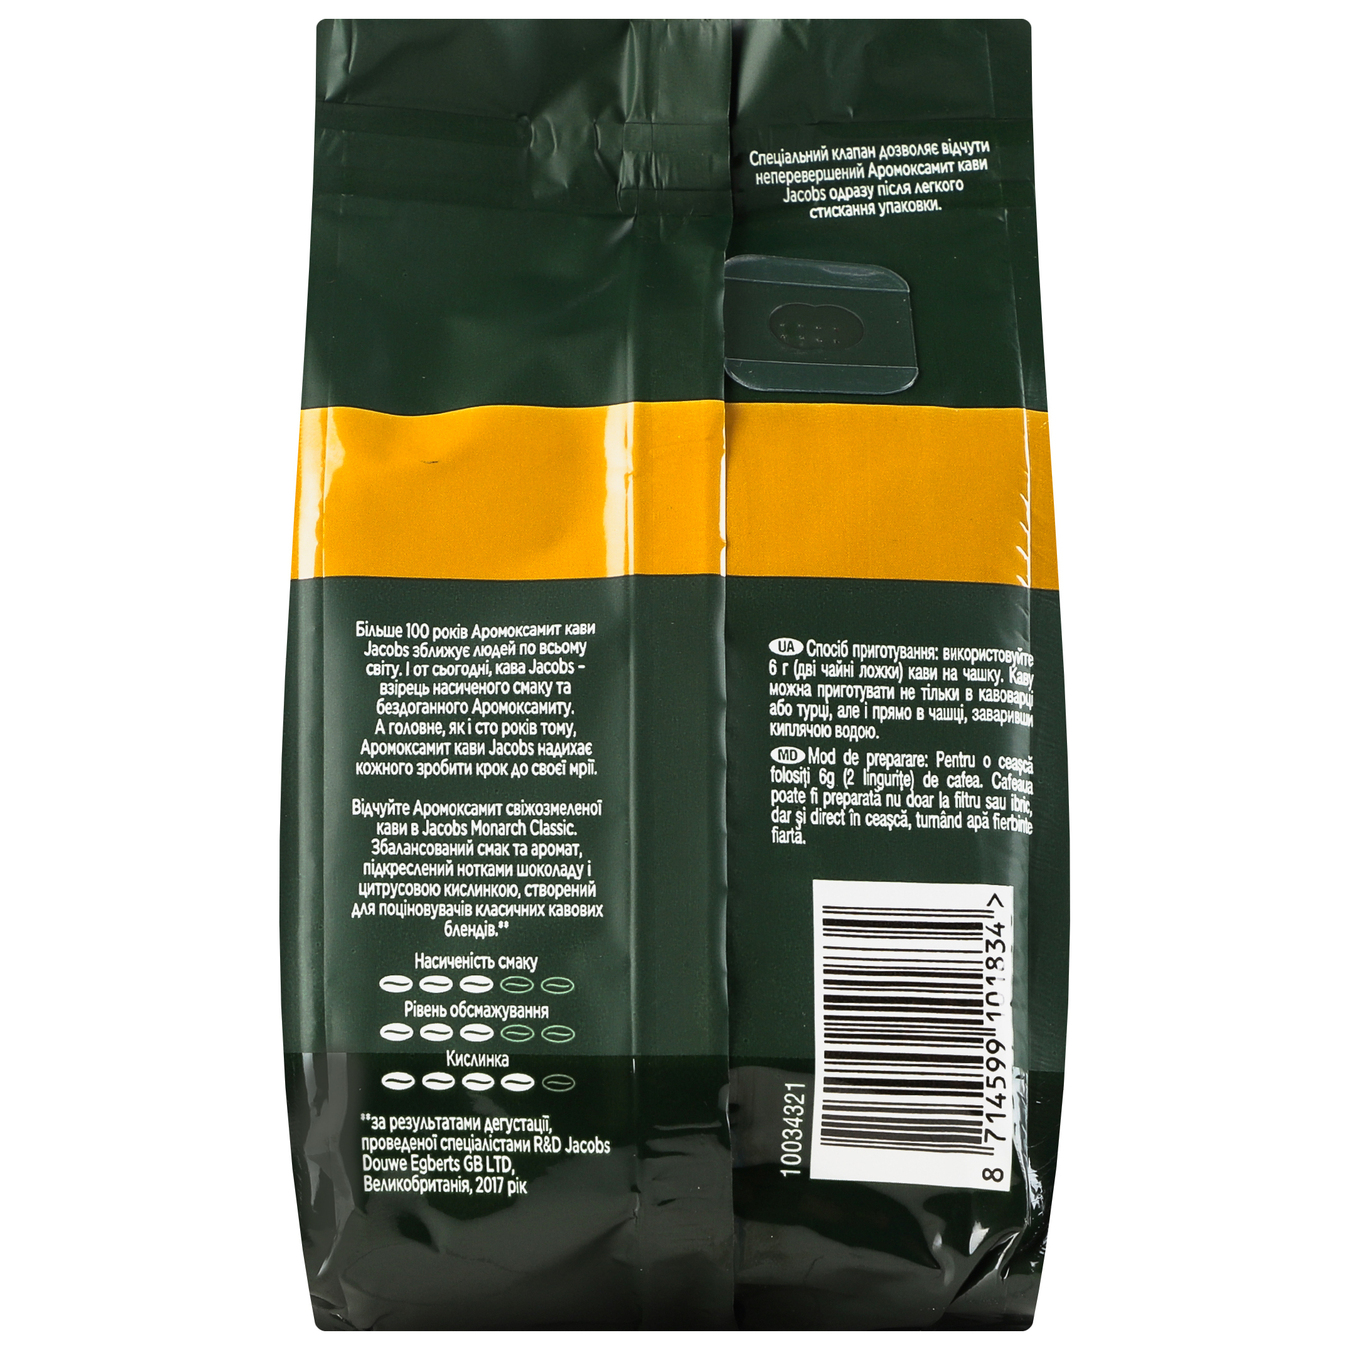 Jacobs Monarch Classic Ground Coffee 70g 3